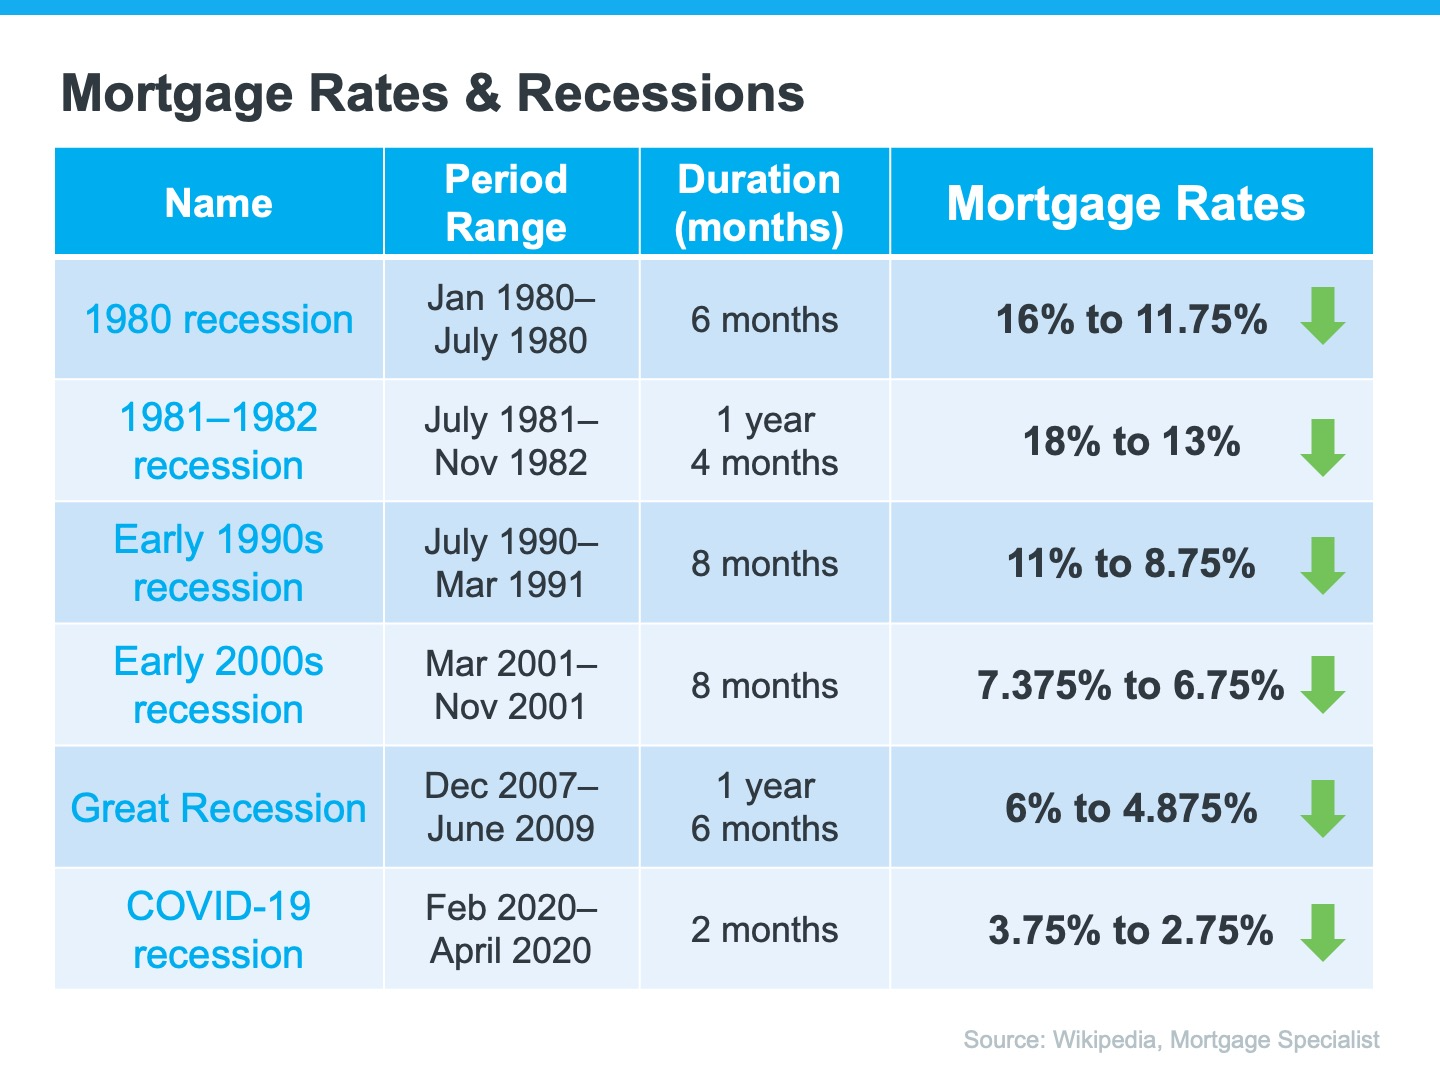 Mortgage Rates and Recessions